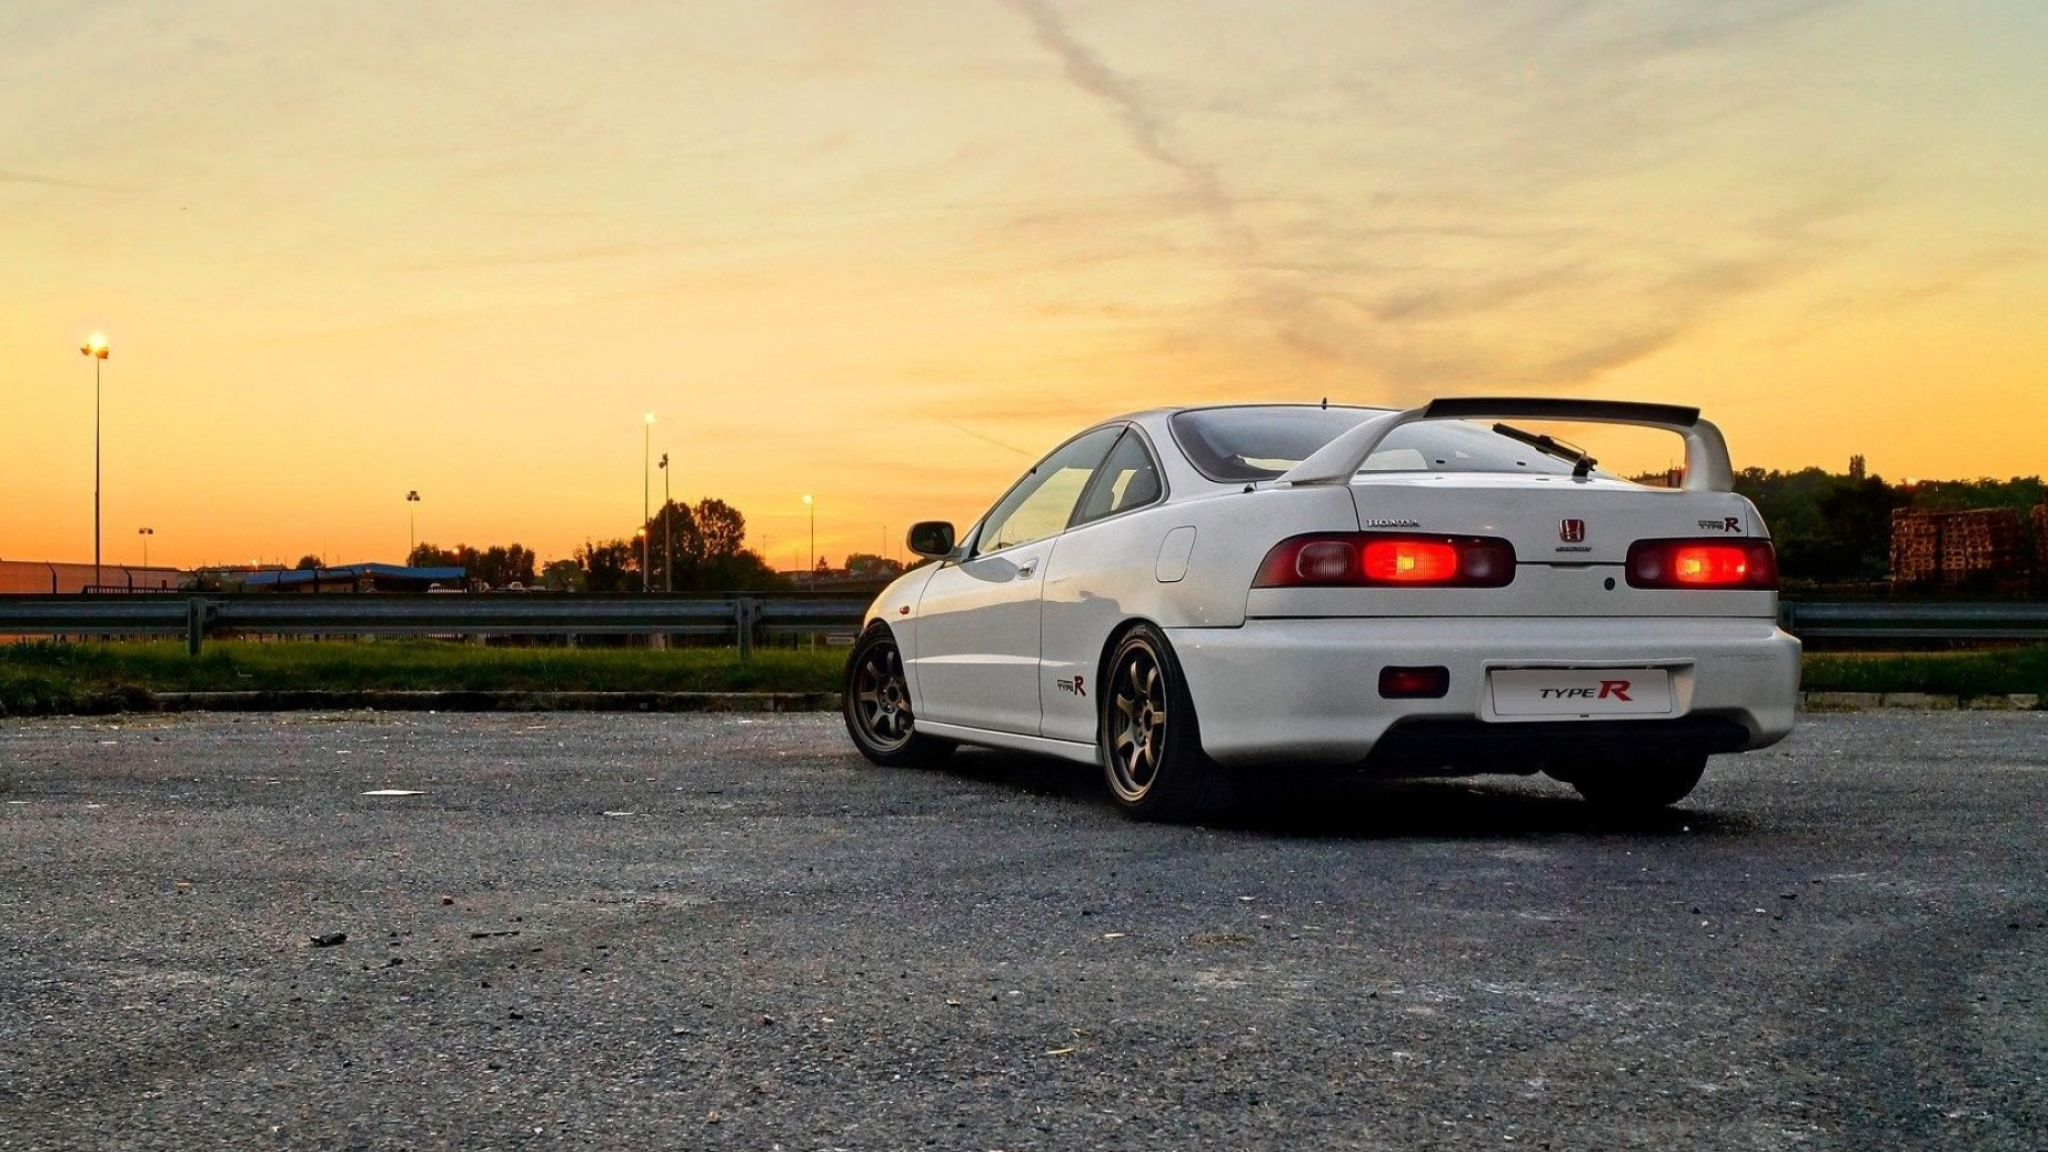 Honda Integra, Speed and style, Auto excellence, Performance on wheels, 2050x1160 HD Desktop